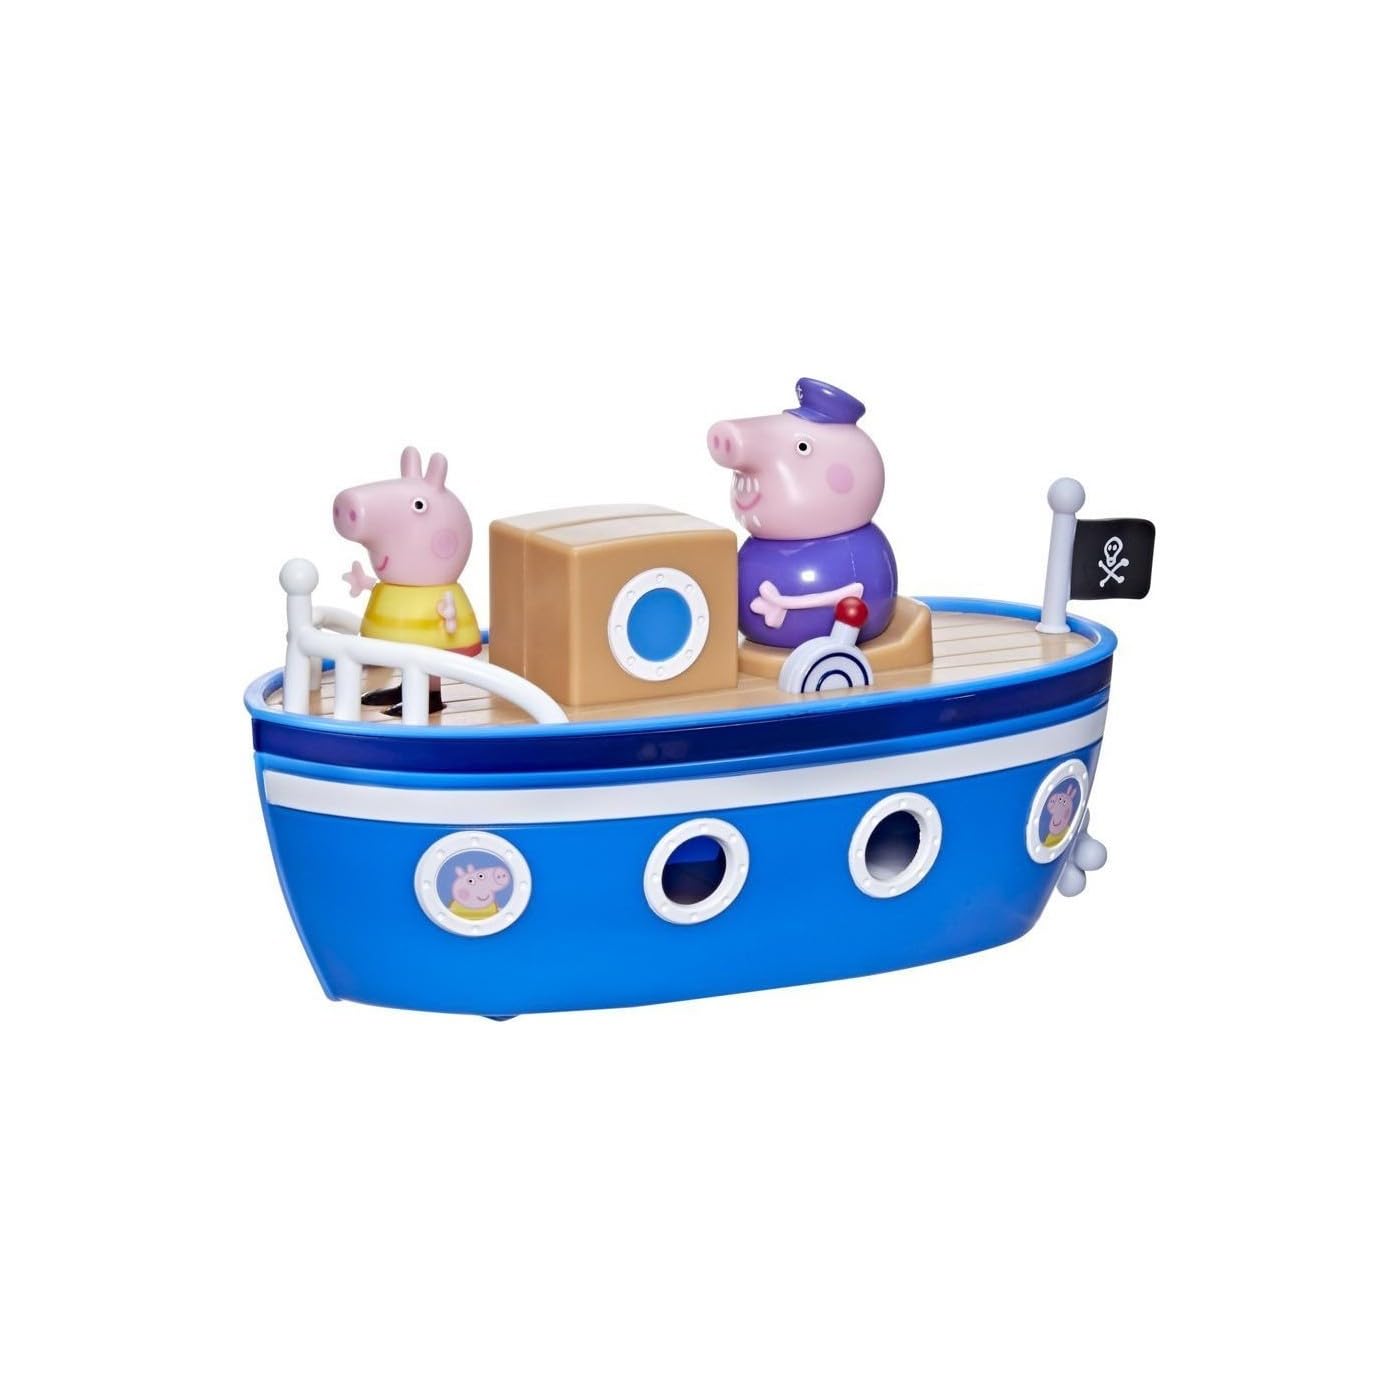 Peppa Pig Grandpa Pig’s Cabin Boat Preschool Toy: 1 Figure, Removable Deck, Rolling Wheels, for Ages 3 and Up